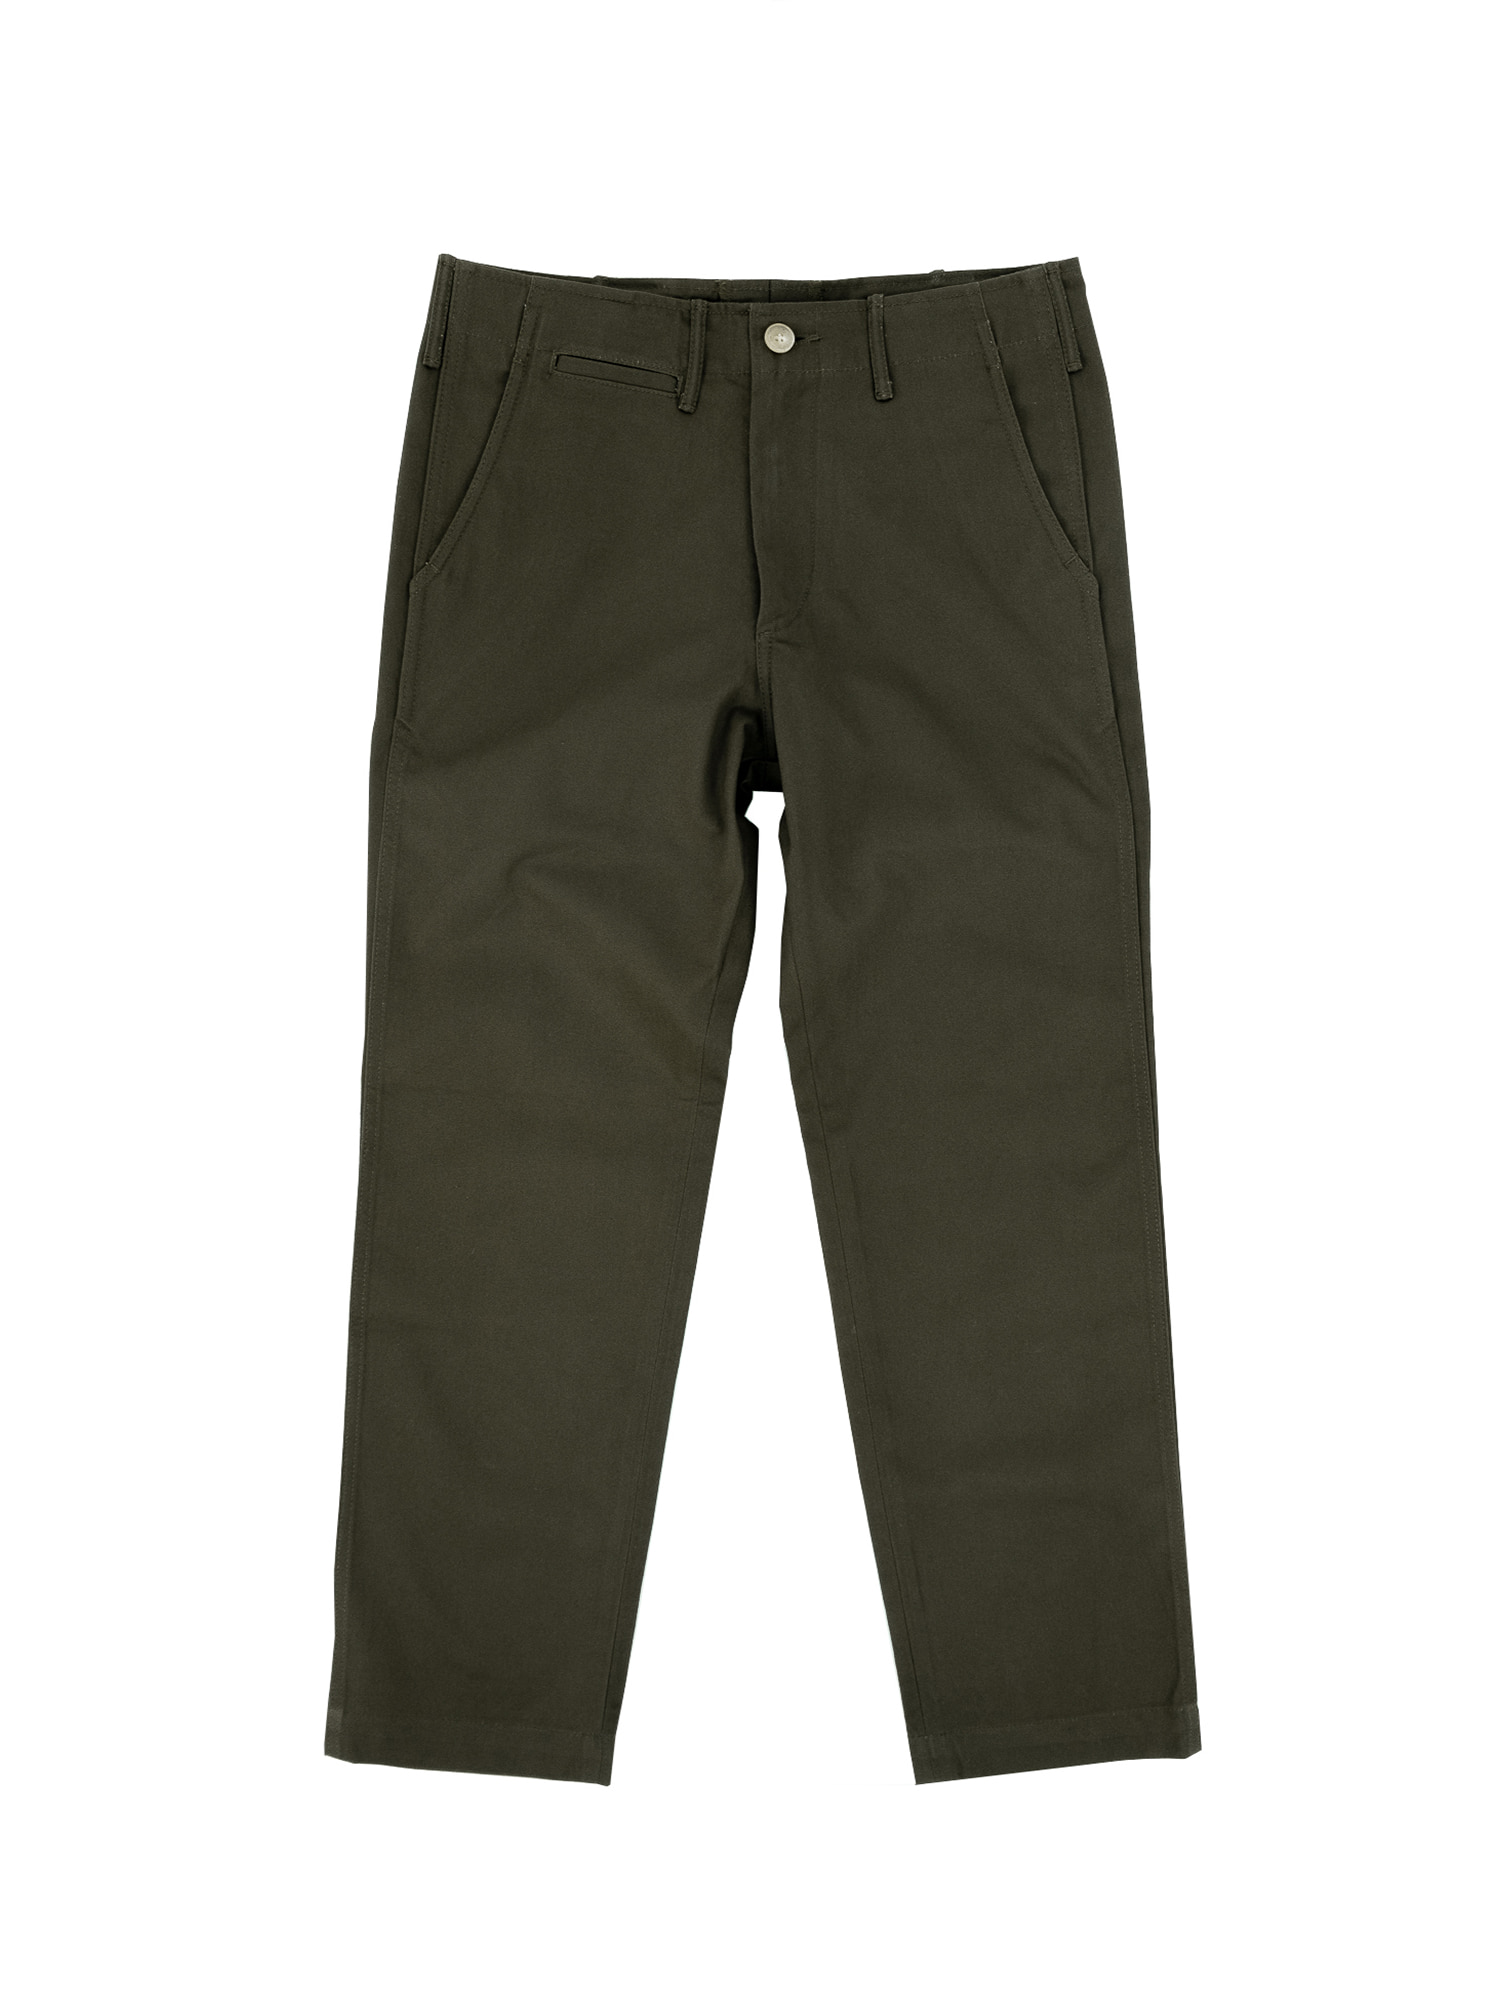 Officer Chino 2nd - Olive Green